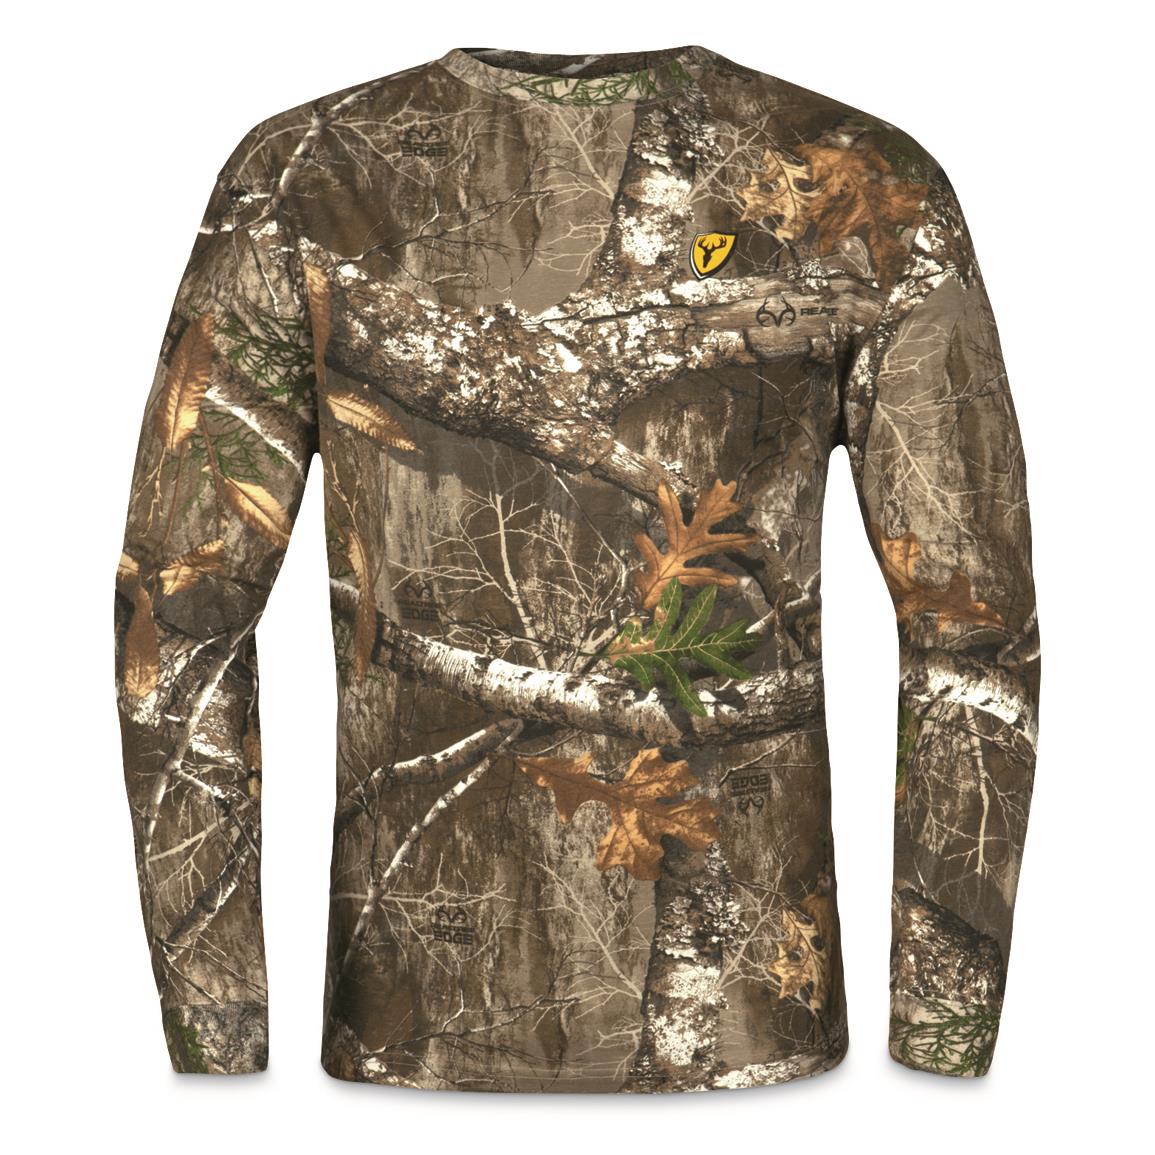 Youth's ScentBlocker Fused Cotton Long-sleeve Hunting Shirt, Realtree EDGE™